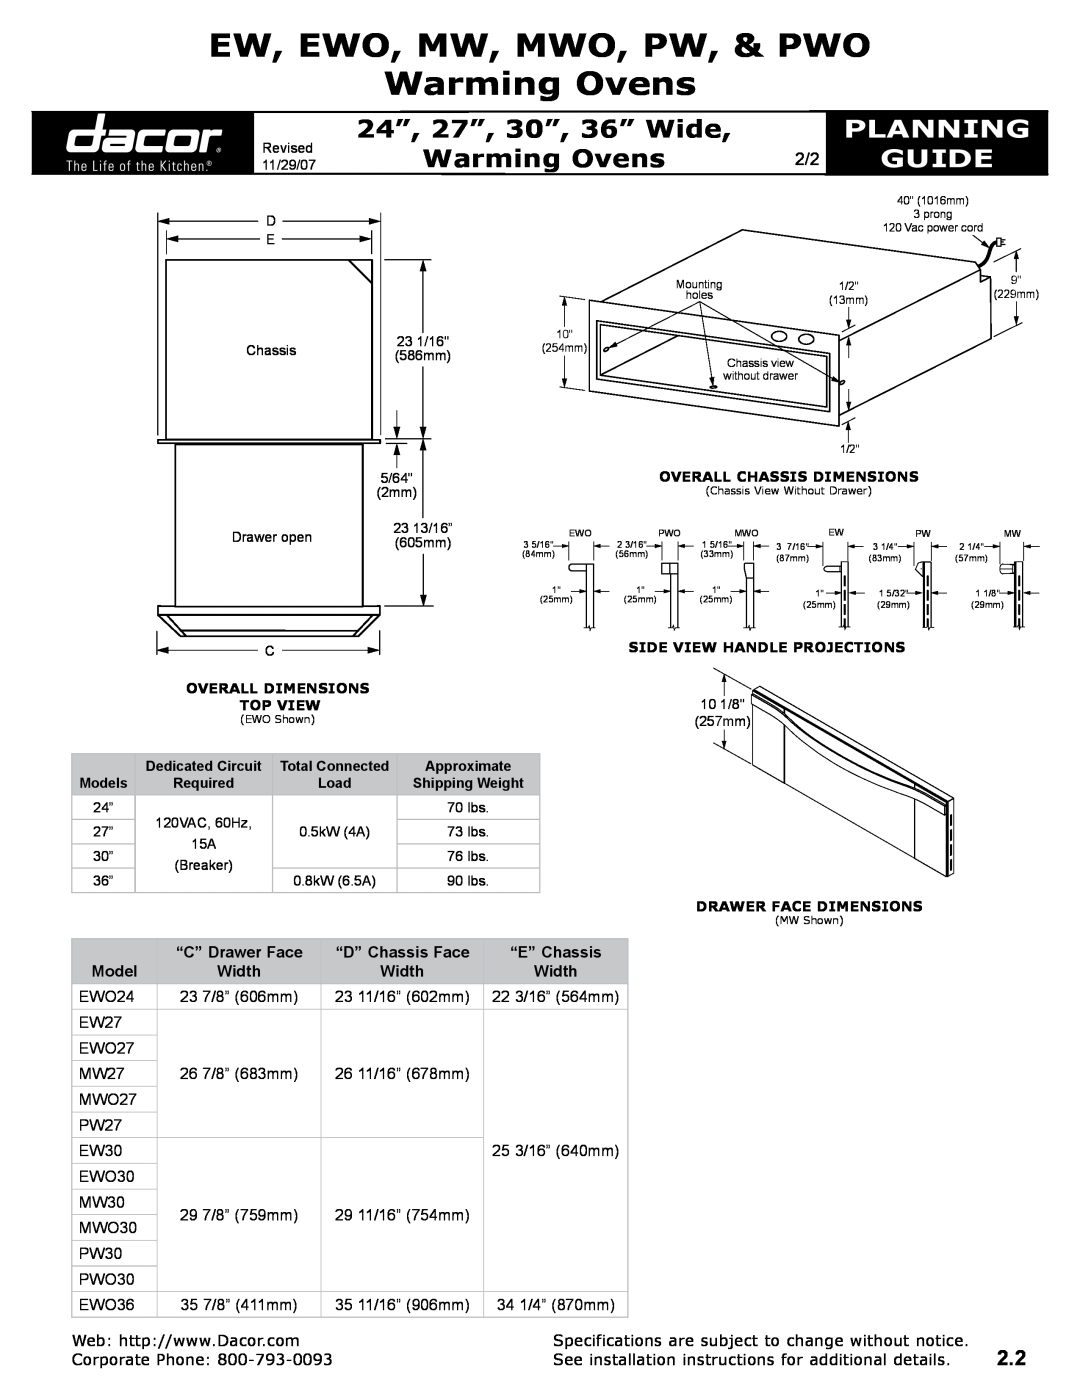 Dacor “C” Drawer Face, “D” Chassis Face, “E” Chassis, Model, Width, EW, EWO, MW, MWO, PW, & PWO Warming Ovens, Planning 